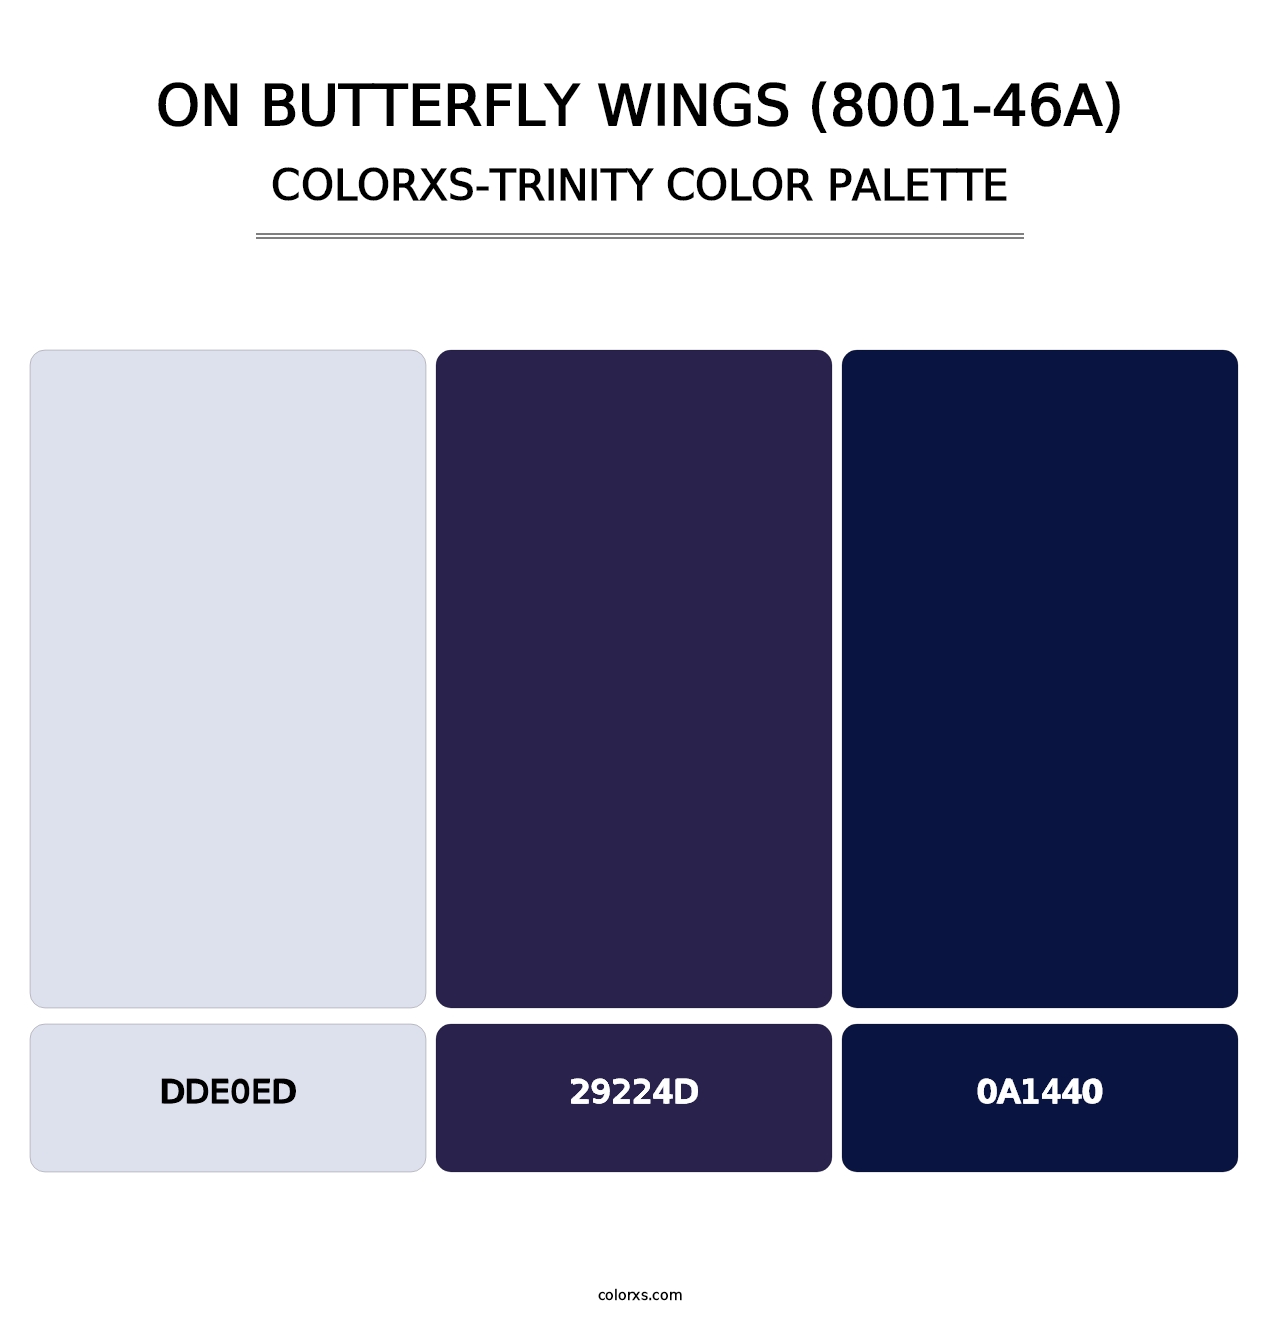 On Butterfly Wings (8001-46A) - Colorxs Trinity Palette